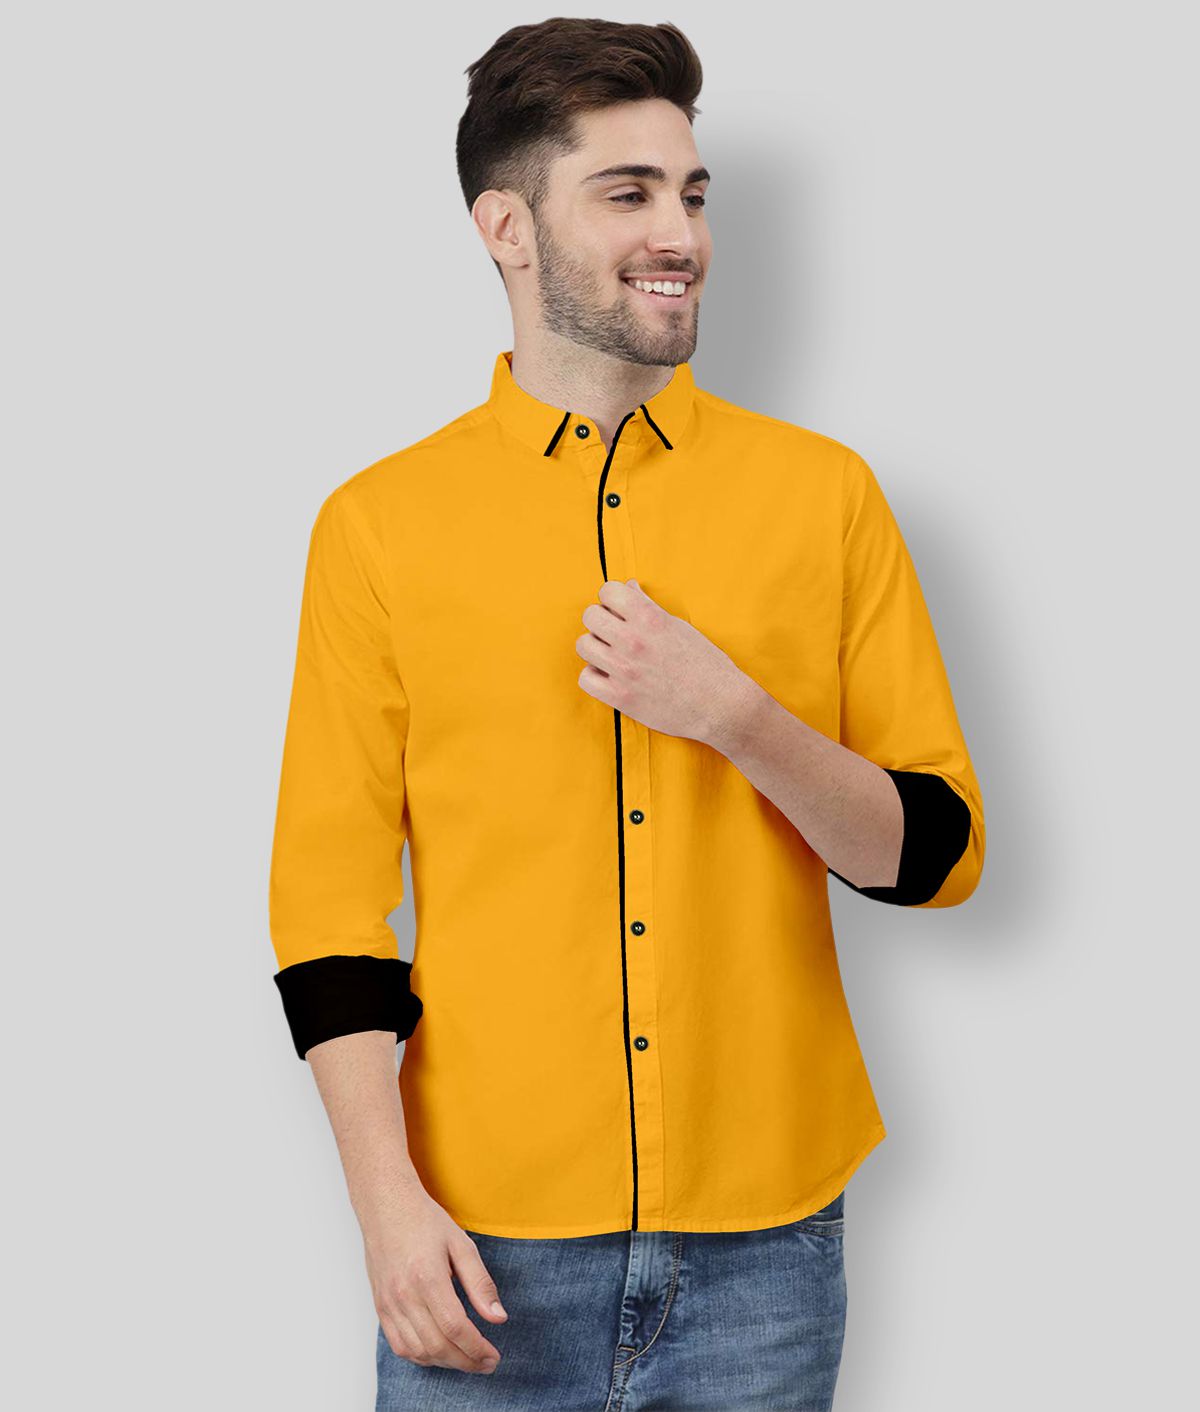     			P&V CREATIONS - Yellow Cotton Blend Regular Fit Men's Casual Shirt (Pack of 1)